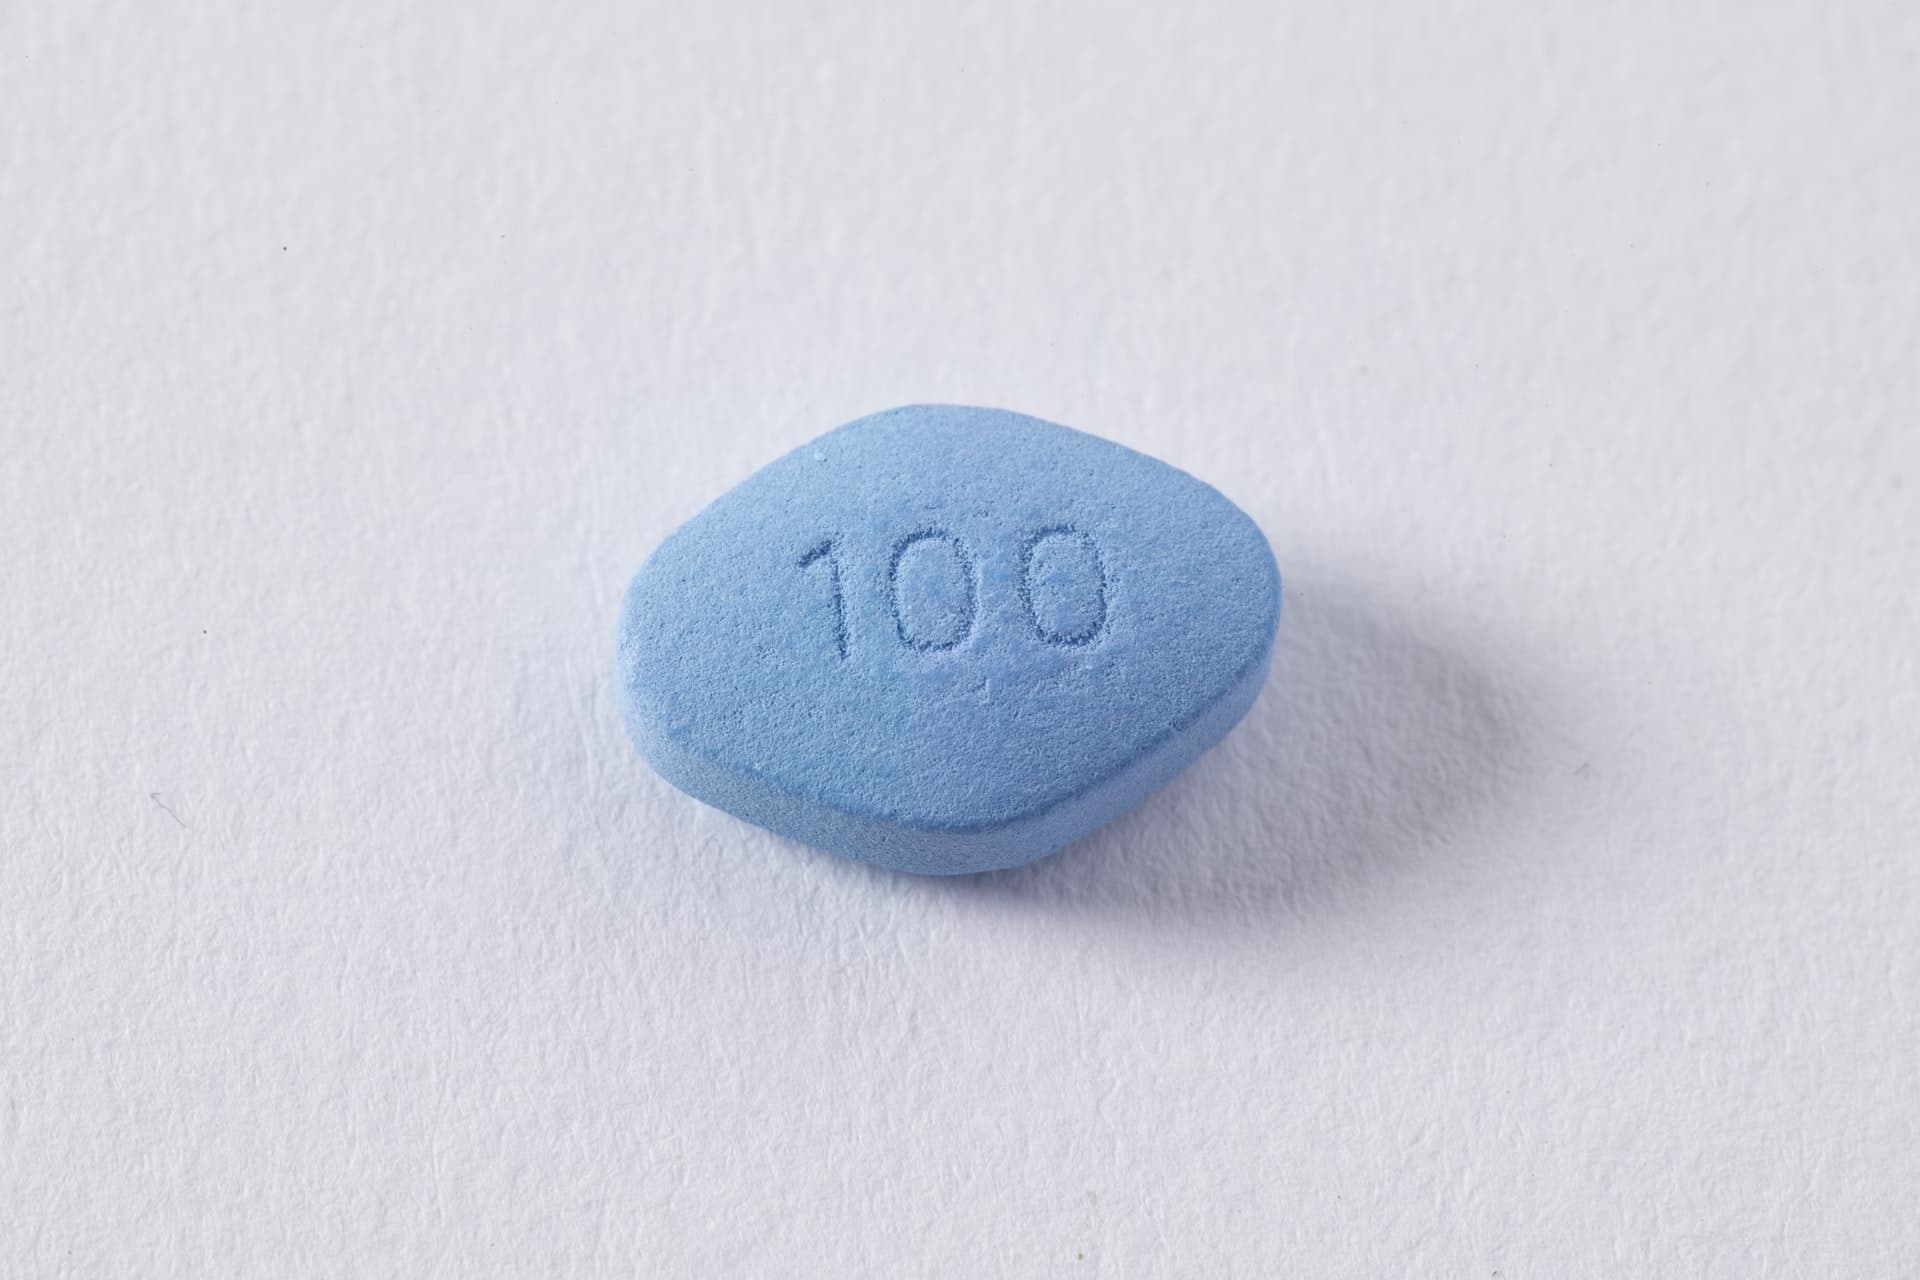 evening back Monk Viagra vs Sildenafil - What is the difference?